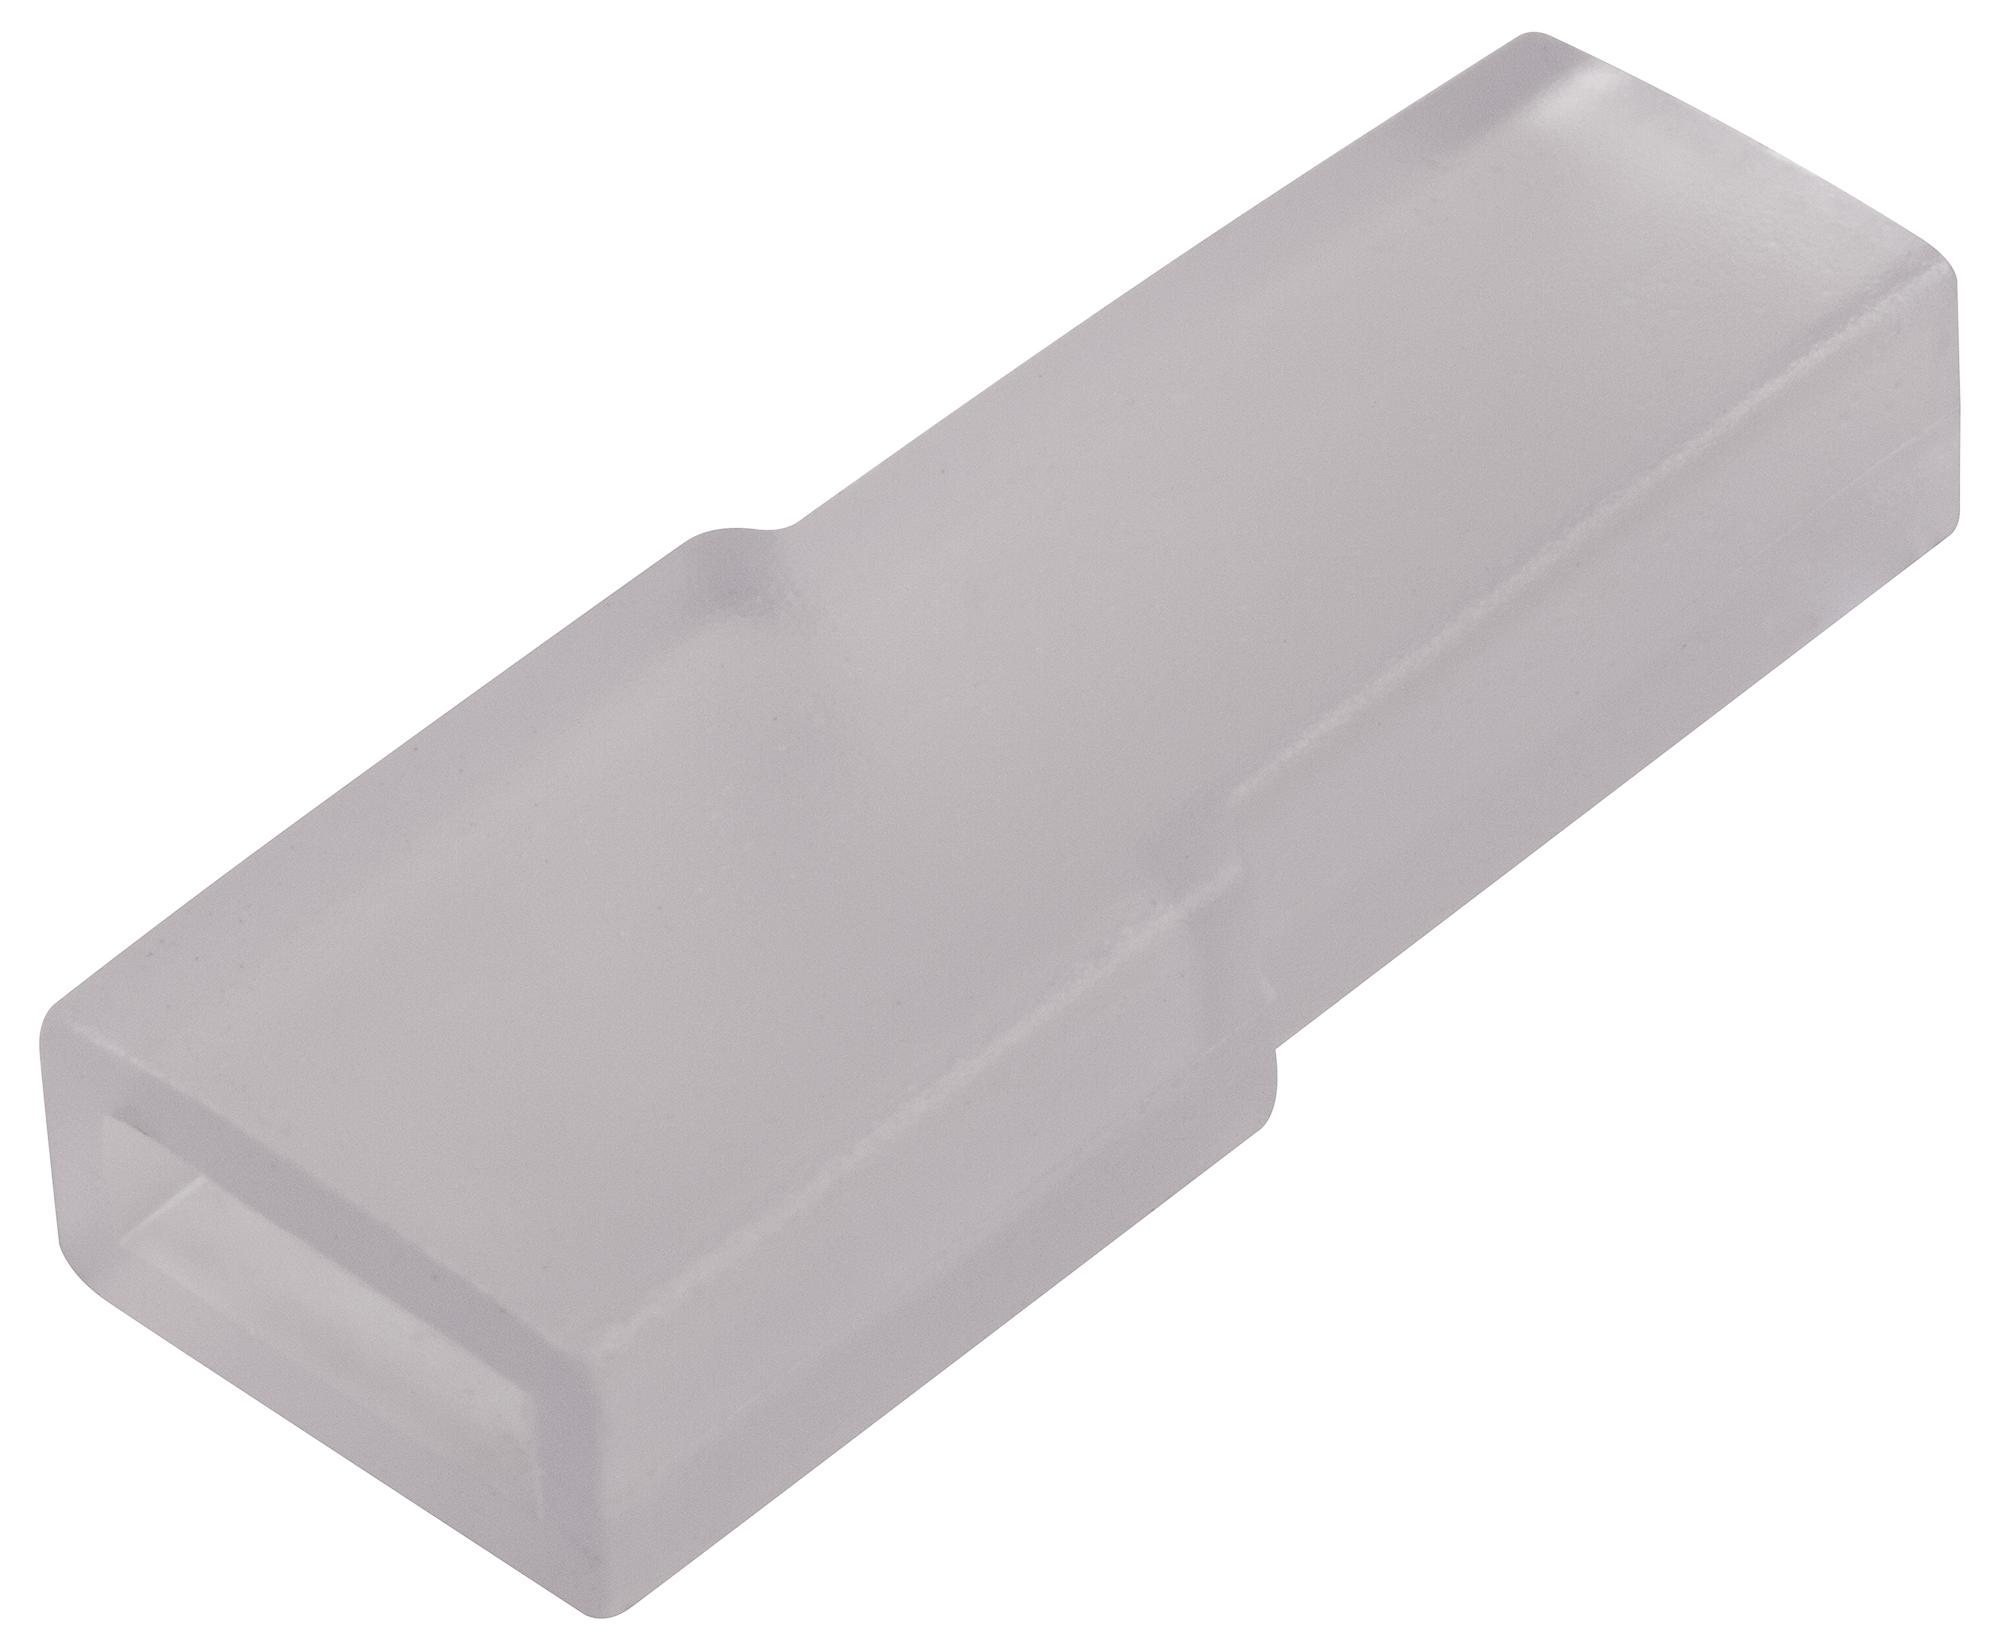 Takbro A003 Pvc Cover 6.3mm Expanded Entry, Pk10